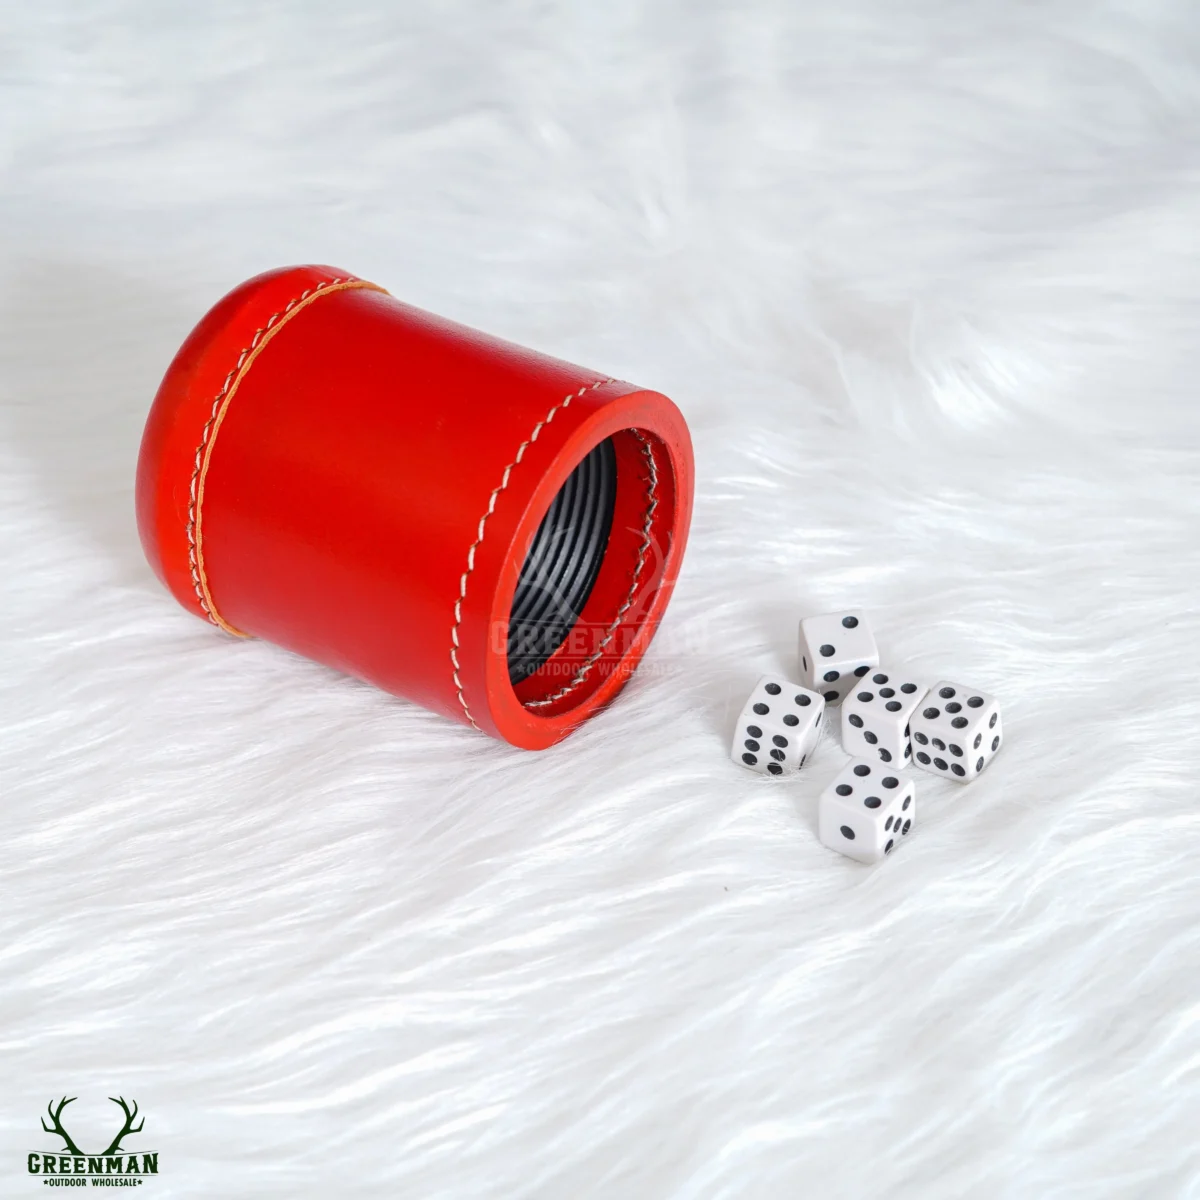 leather dice cup, red leather dice shaker, red leather dice cup